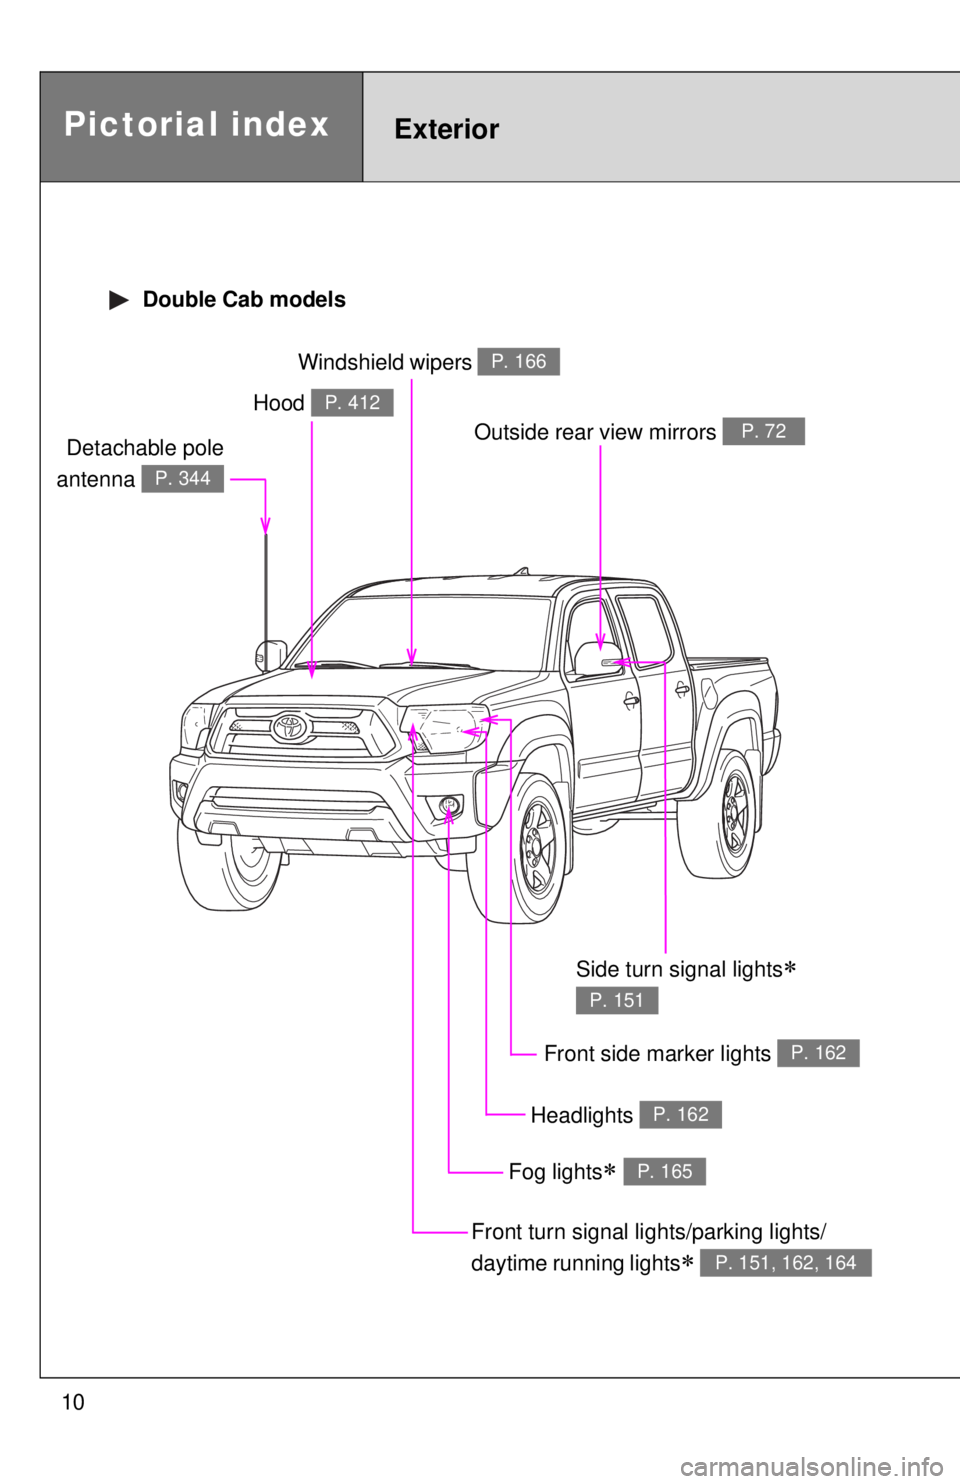 TOYOTA TACOMA 2014  Owners Manual (in English) 10
Pictorial indexExterior
 Double Cab models
Headlights P. 162
Hood P. 412
Windshield wipers P. 166
Front side marker lights P. 162
Outside rear view mirrors P. 72
Front turn signal lights/parking li